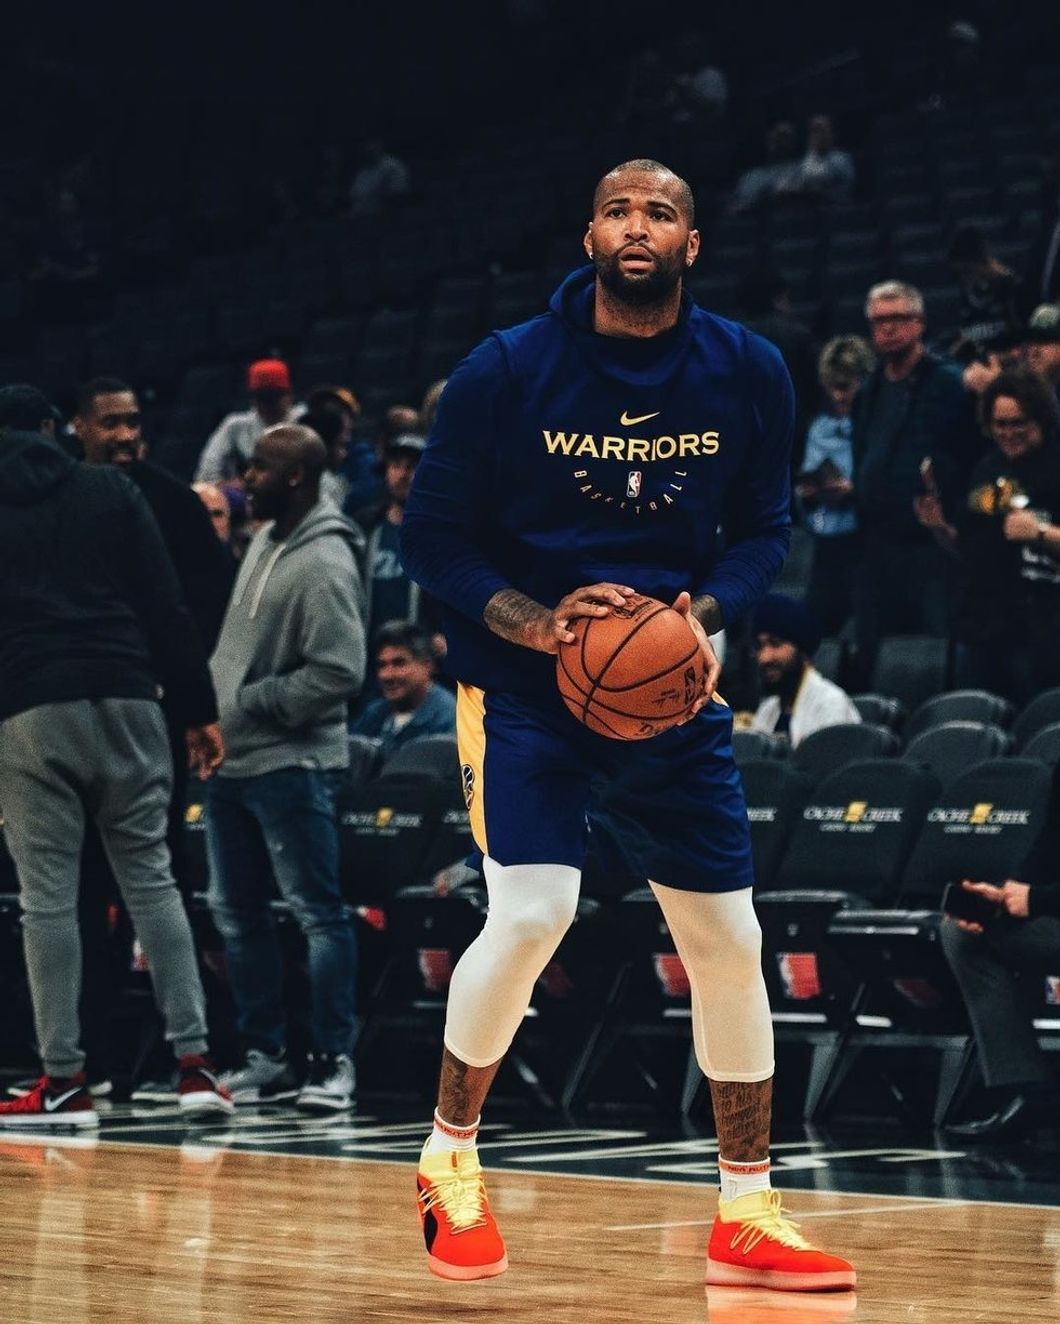 Demarcus Cousins Will Return to The Court Soon And All Eyes Are On Him